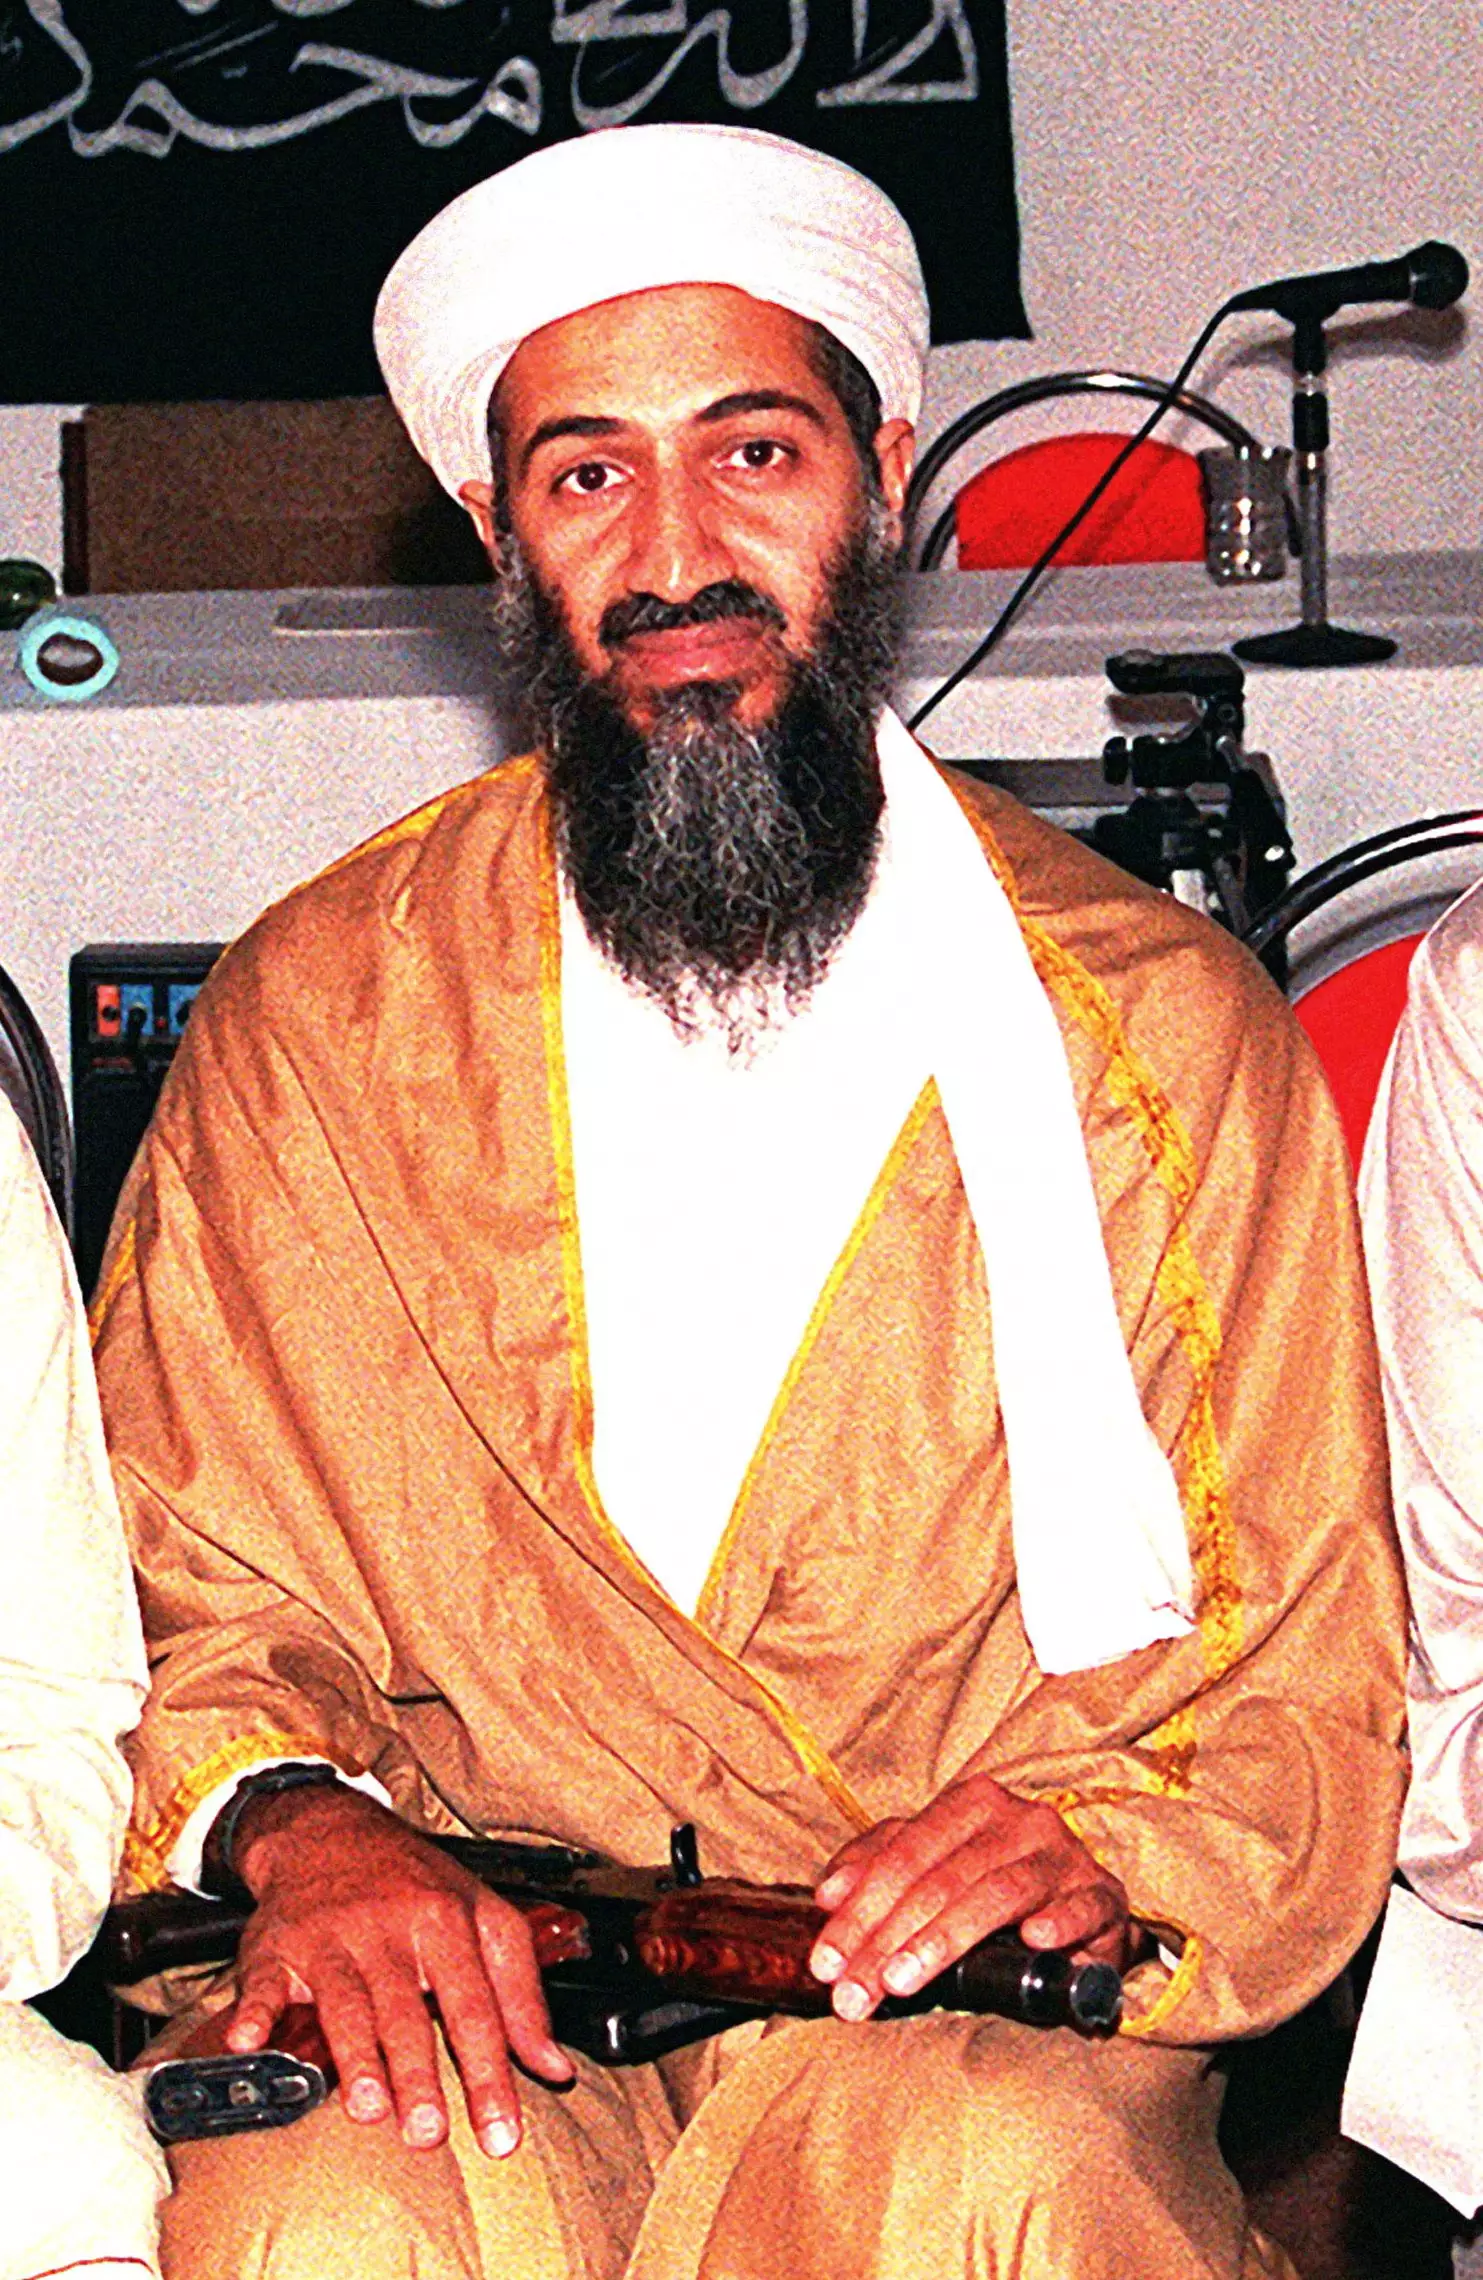 Bin Laden was the subject of a 10-year manhunt.